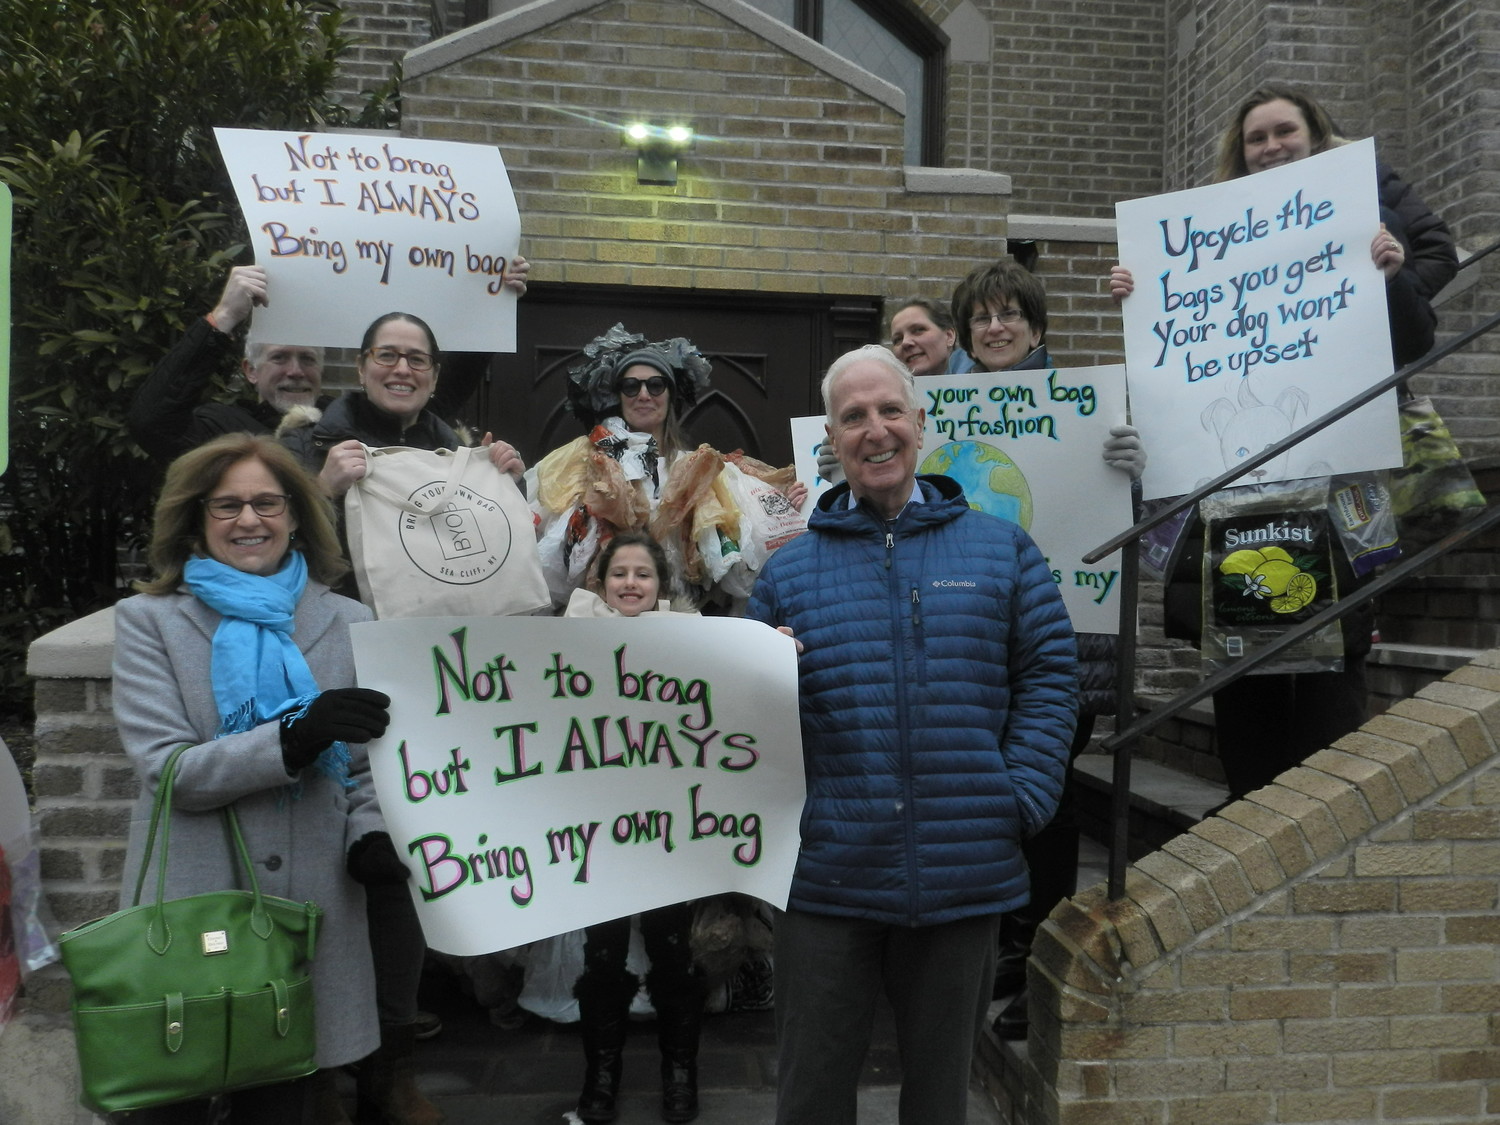 Trustees Dina Epstein, far left, and Kevin McGilloway joined residents in support of a “bring your own bag” ordinance for the village.